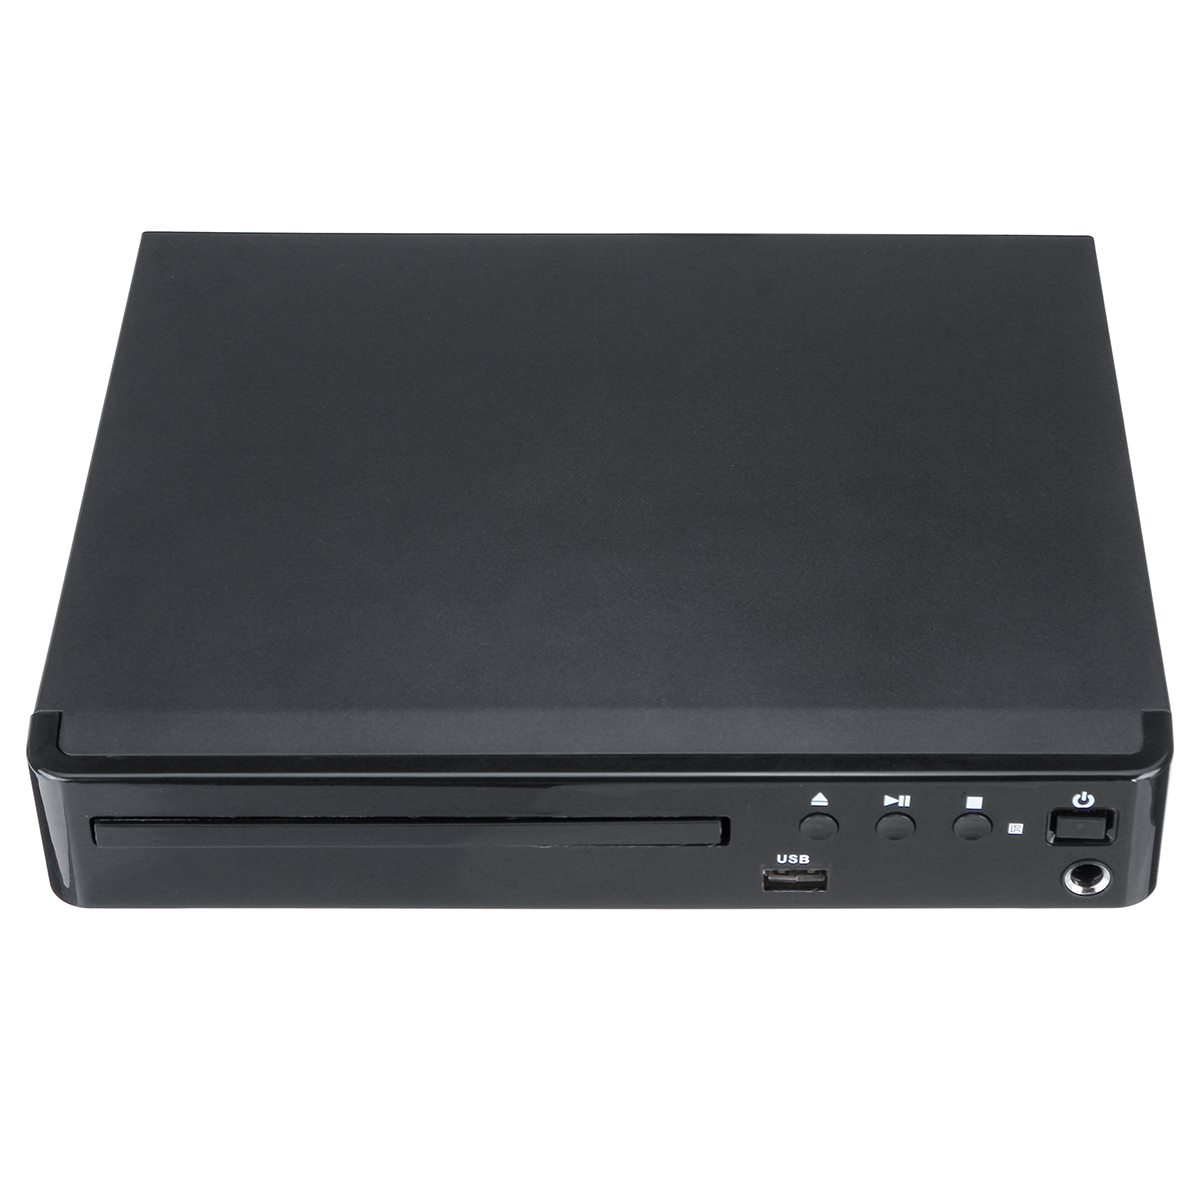 Find 1080P Full HD LCD DVD Player Compact 6 Region Stereo Video MP4 MP3 CD USB Remote for Sale on Gipsybee.com with cryptocurrencies